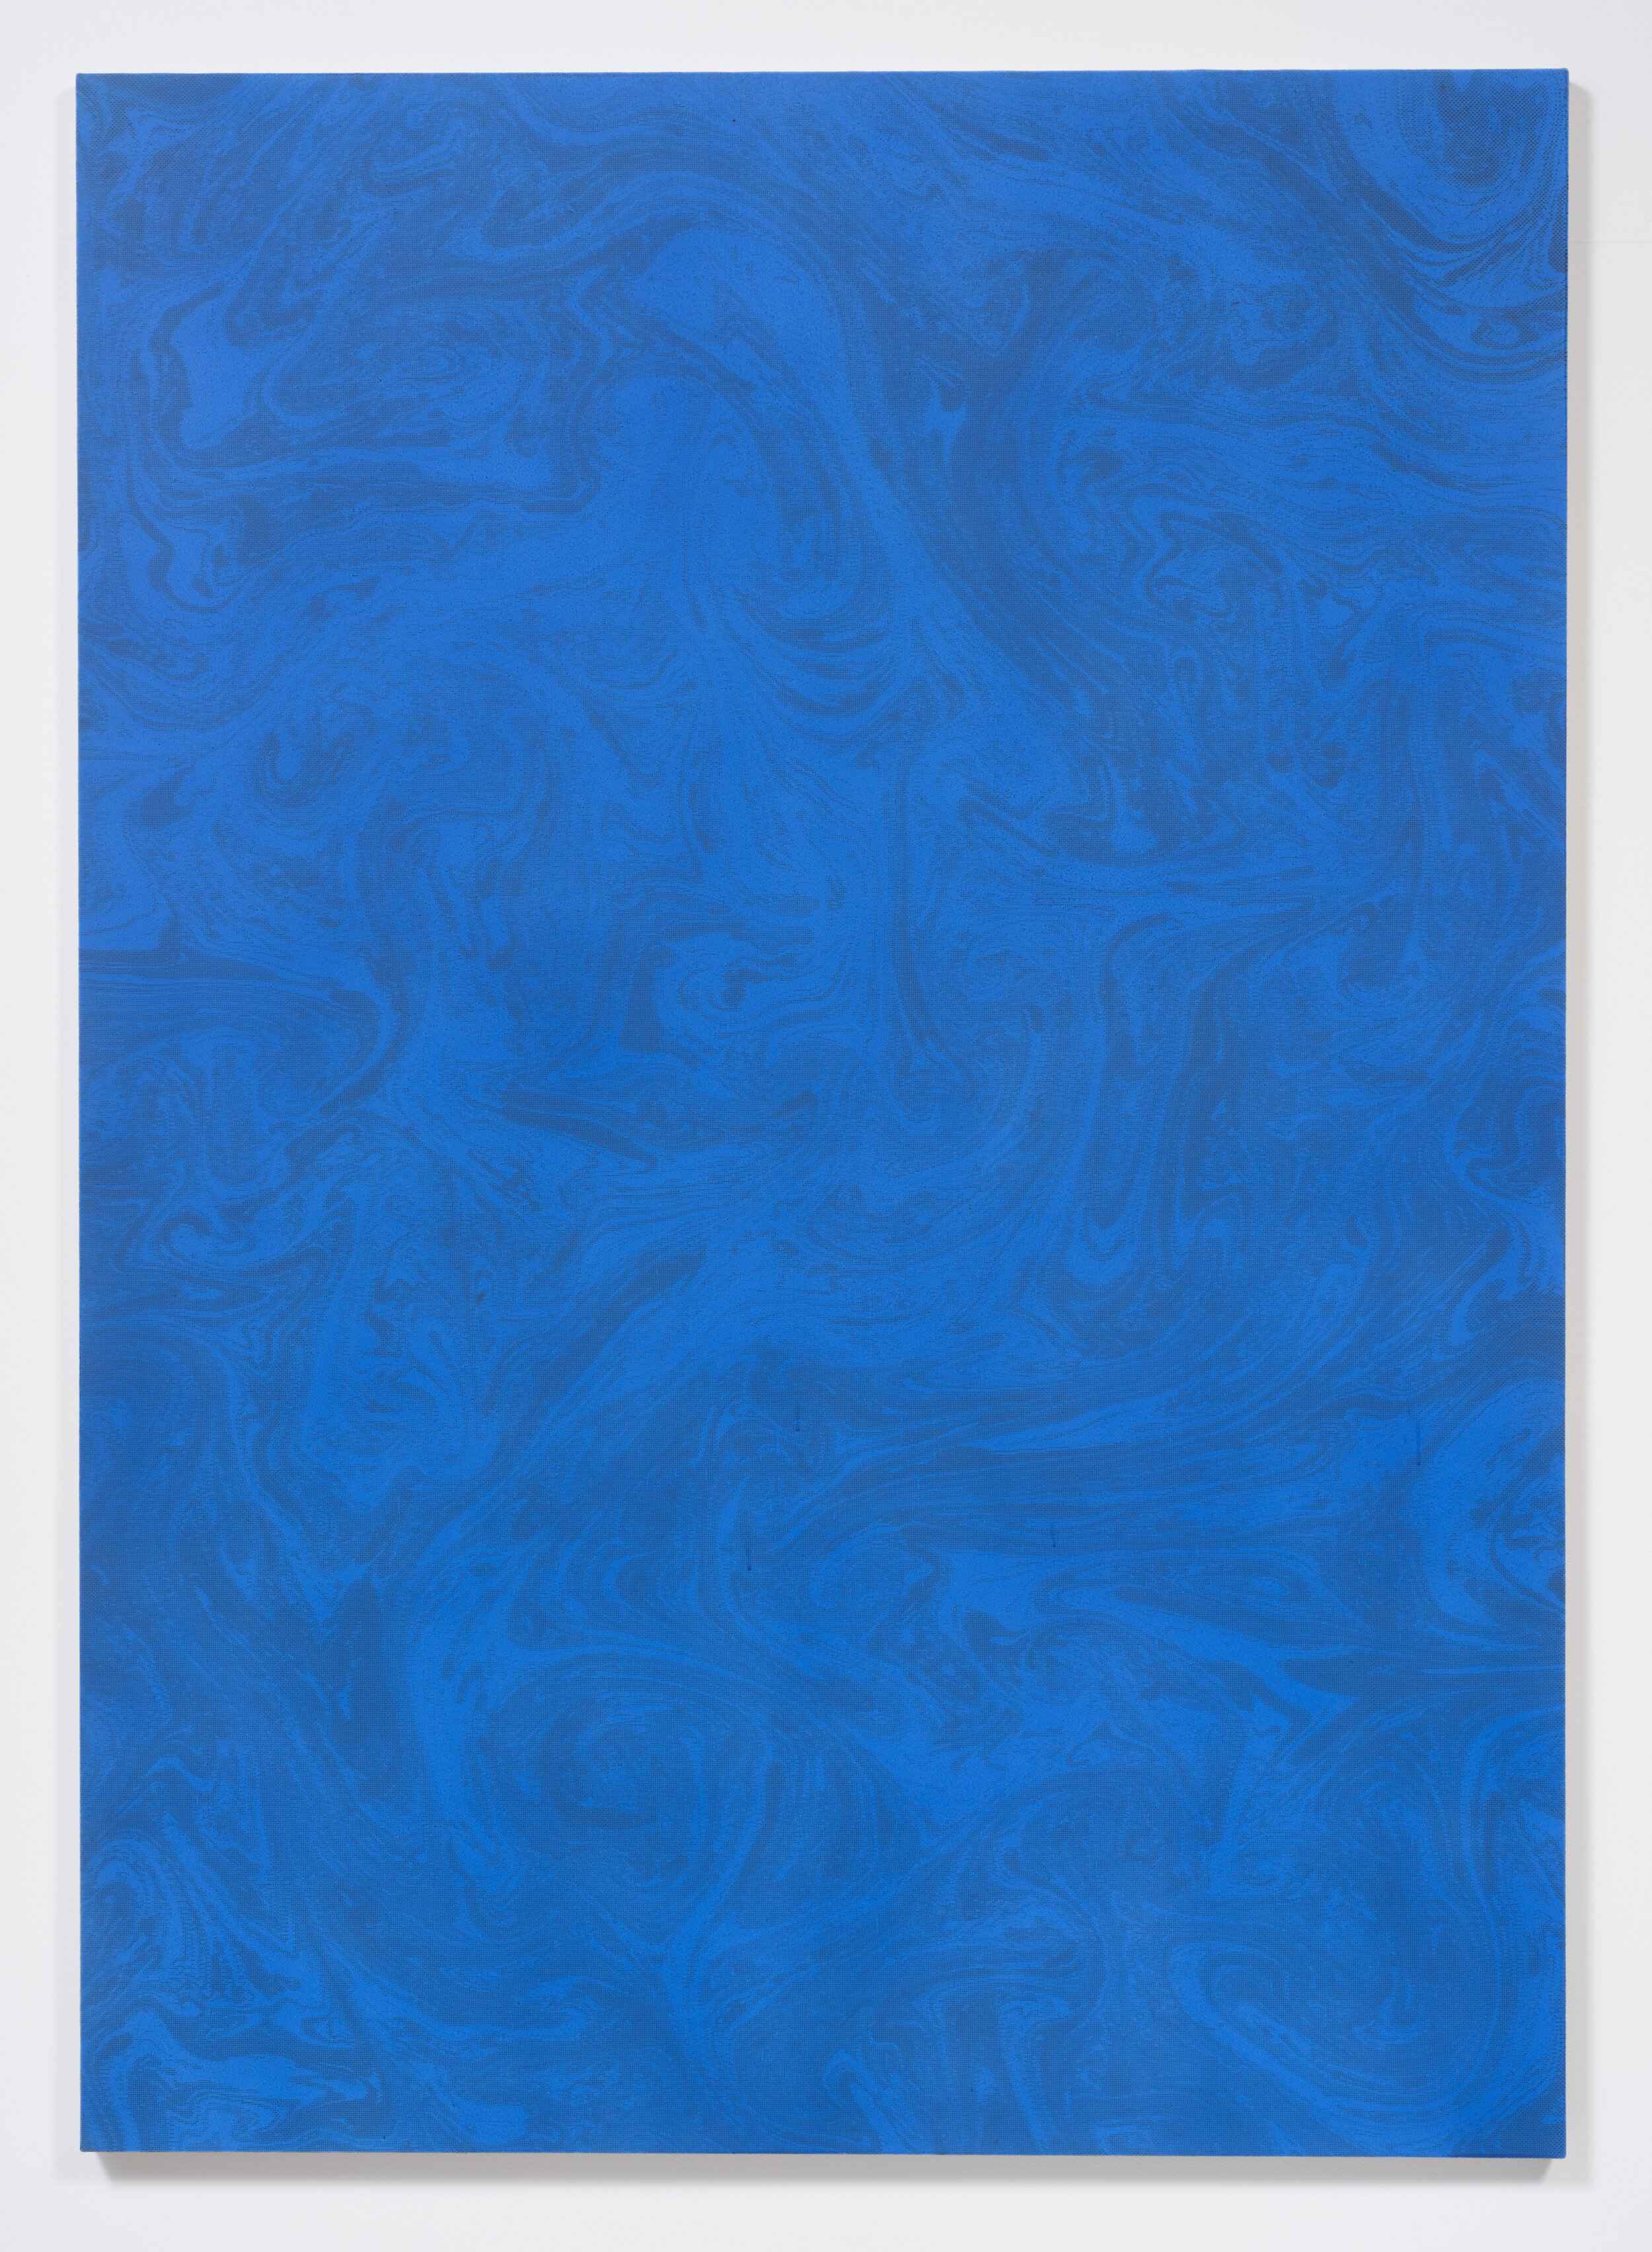   Untitled Painting in Blue/Violet,  2014. Acrylic on canvas. 84 x 60 inches 